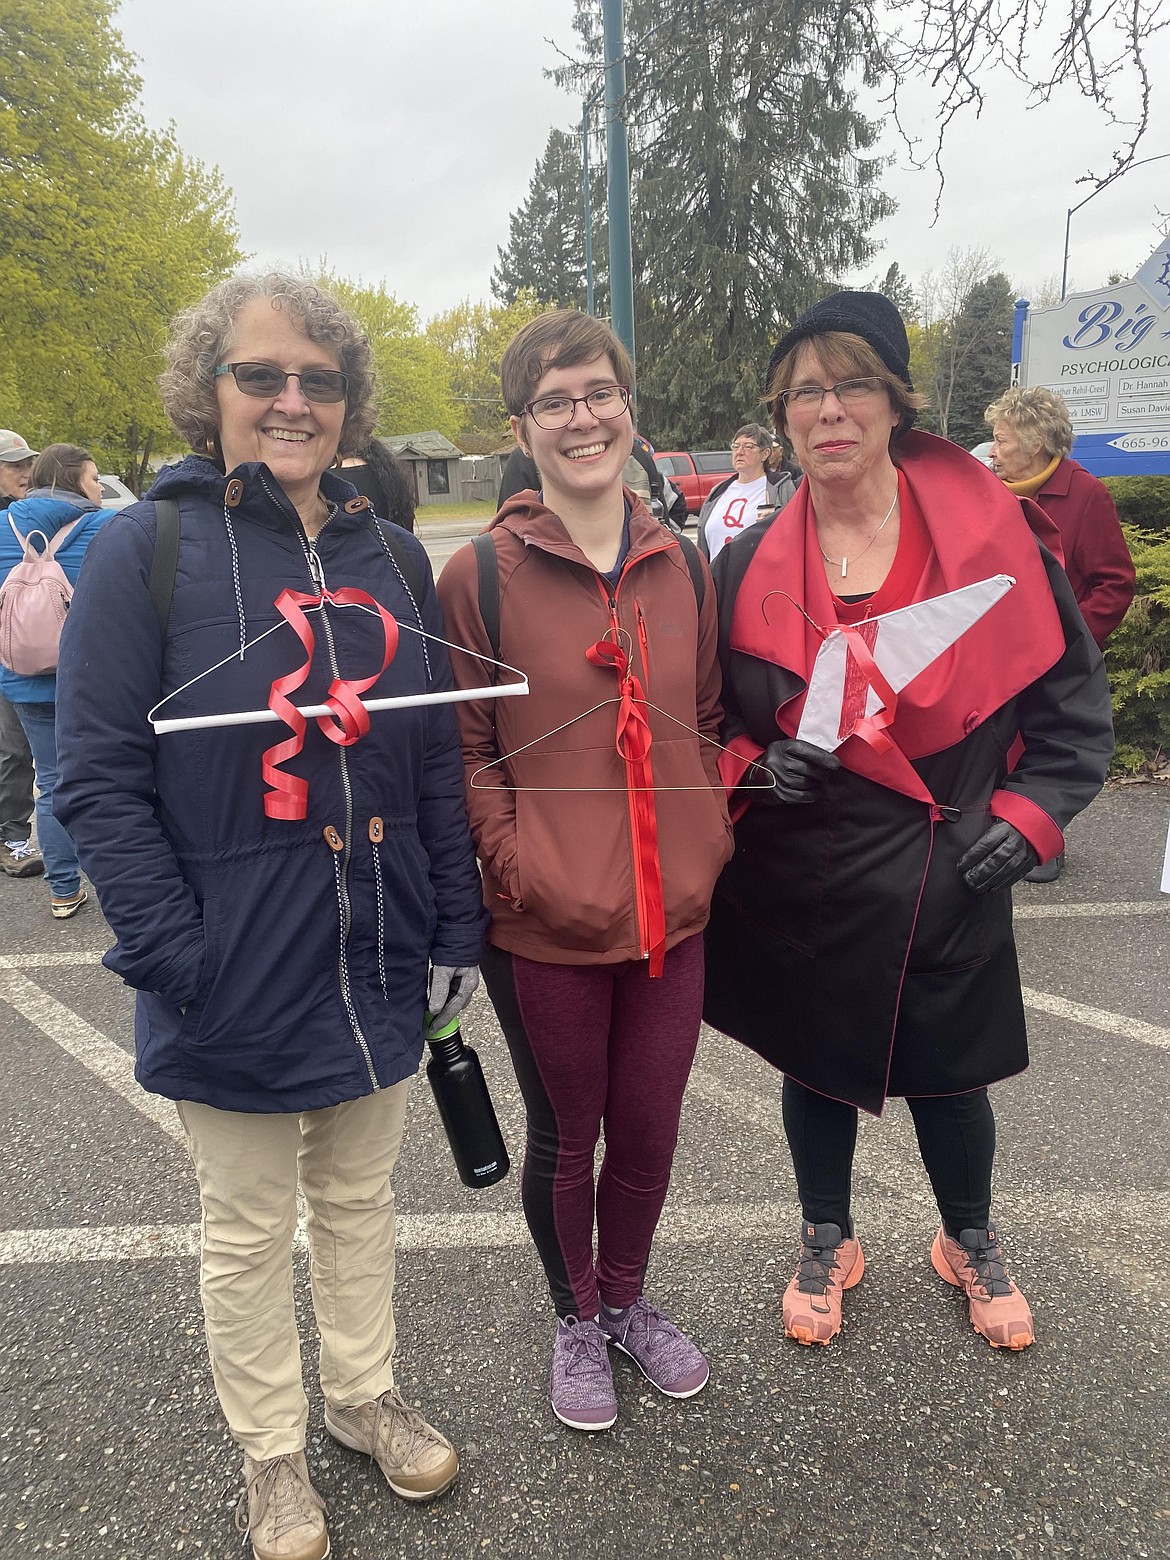 Participants in the women's march Saturday chanted and carried signs. For Karine Nelson (from left), daughter Aimee Croteau and friend Lynn Fleming, metal coat hangers expressed their message.